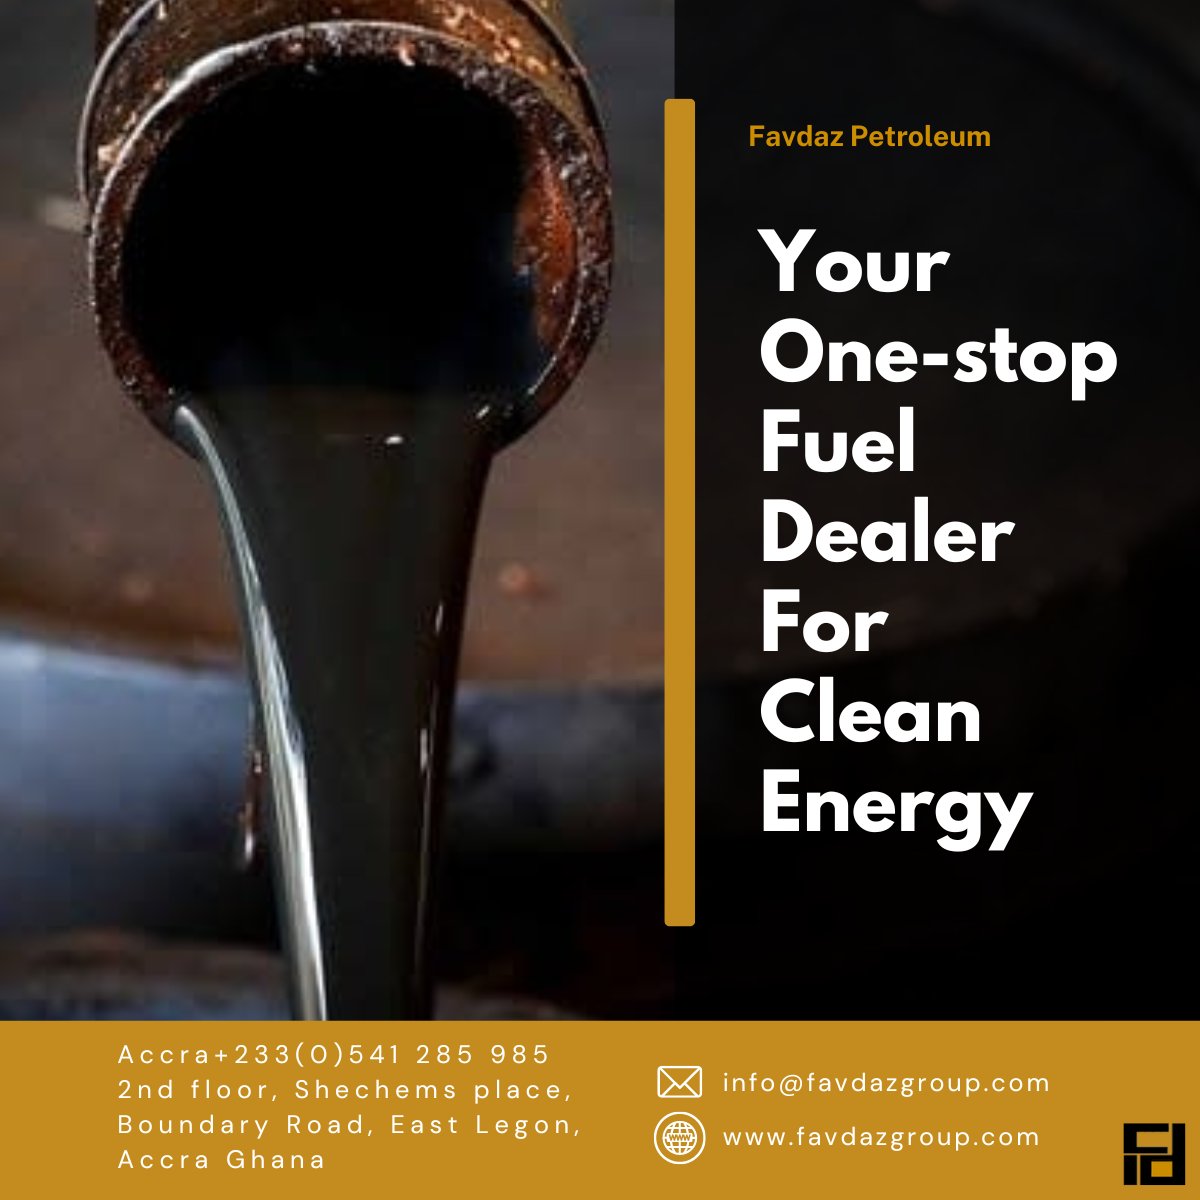 🌟Favdaz Petroleum - your one-stop fuel dealer for clean energy! 💚🛢️⛽️

Join the #FavdazPetroleum family and experience unparalleled service in clean fuel distribution! 🤝✨

#CleanEnergy #FuelDealer #PoweringCommunities #FuelDistribution
#accrafuel